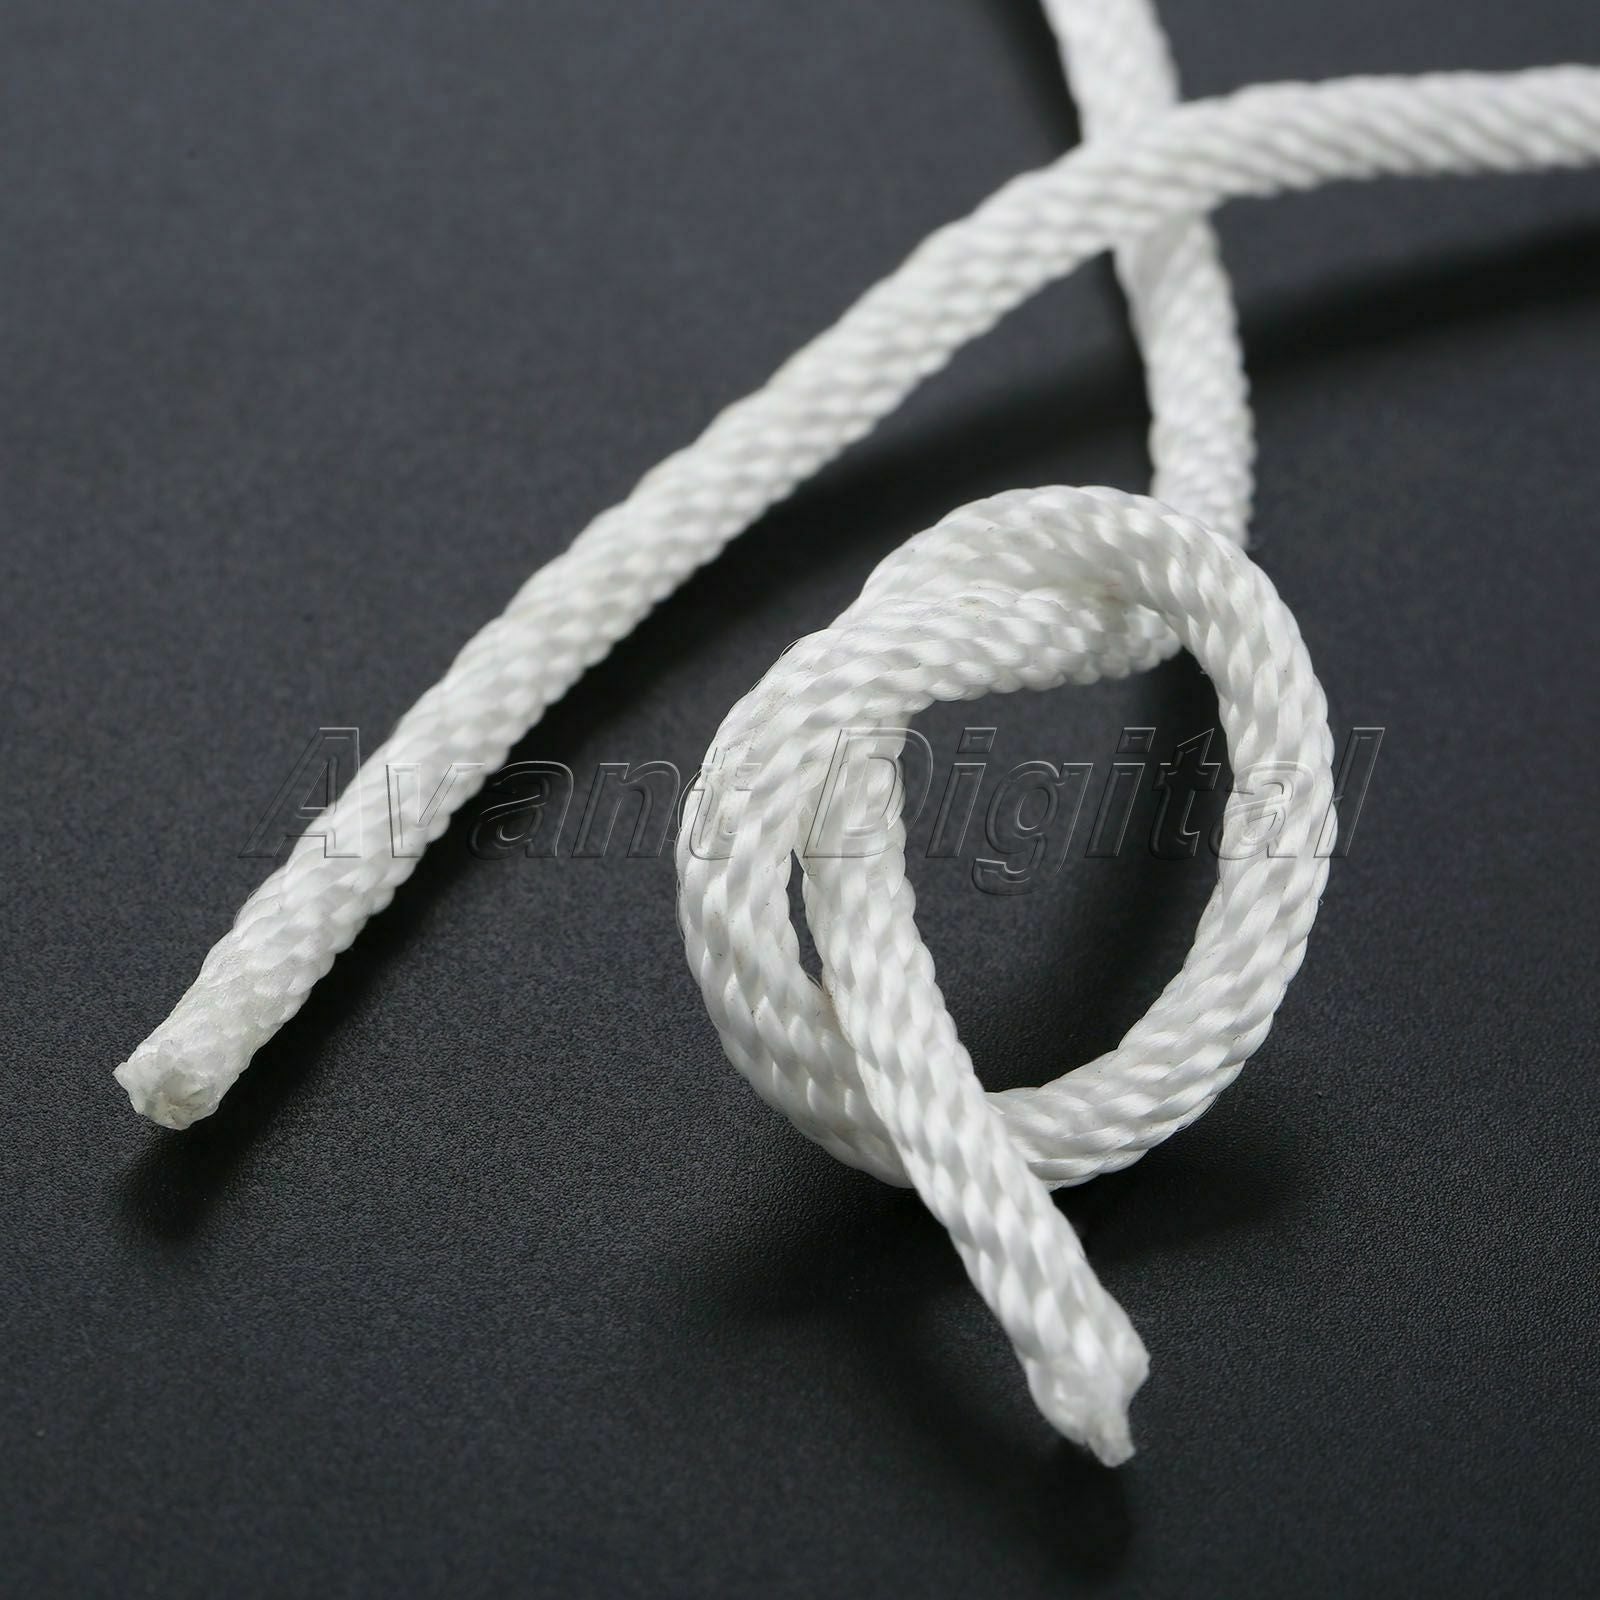 1 x Chainsaws Starter Rope Line String Diameter 4.5mm Durable Parts 10 meters